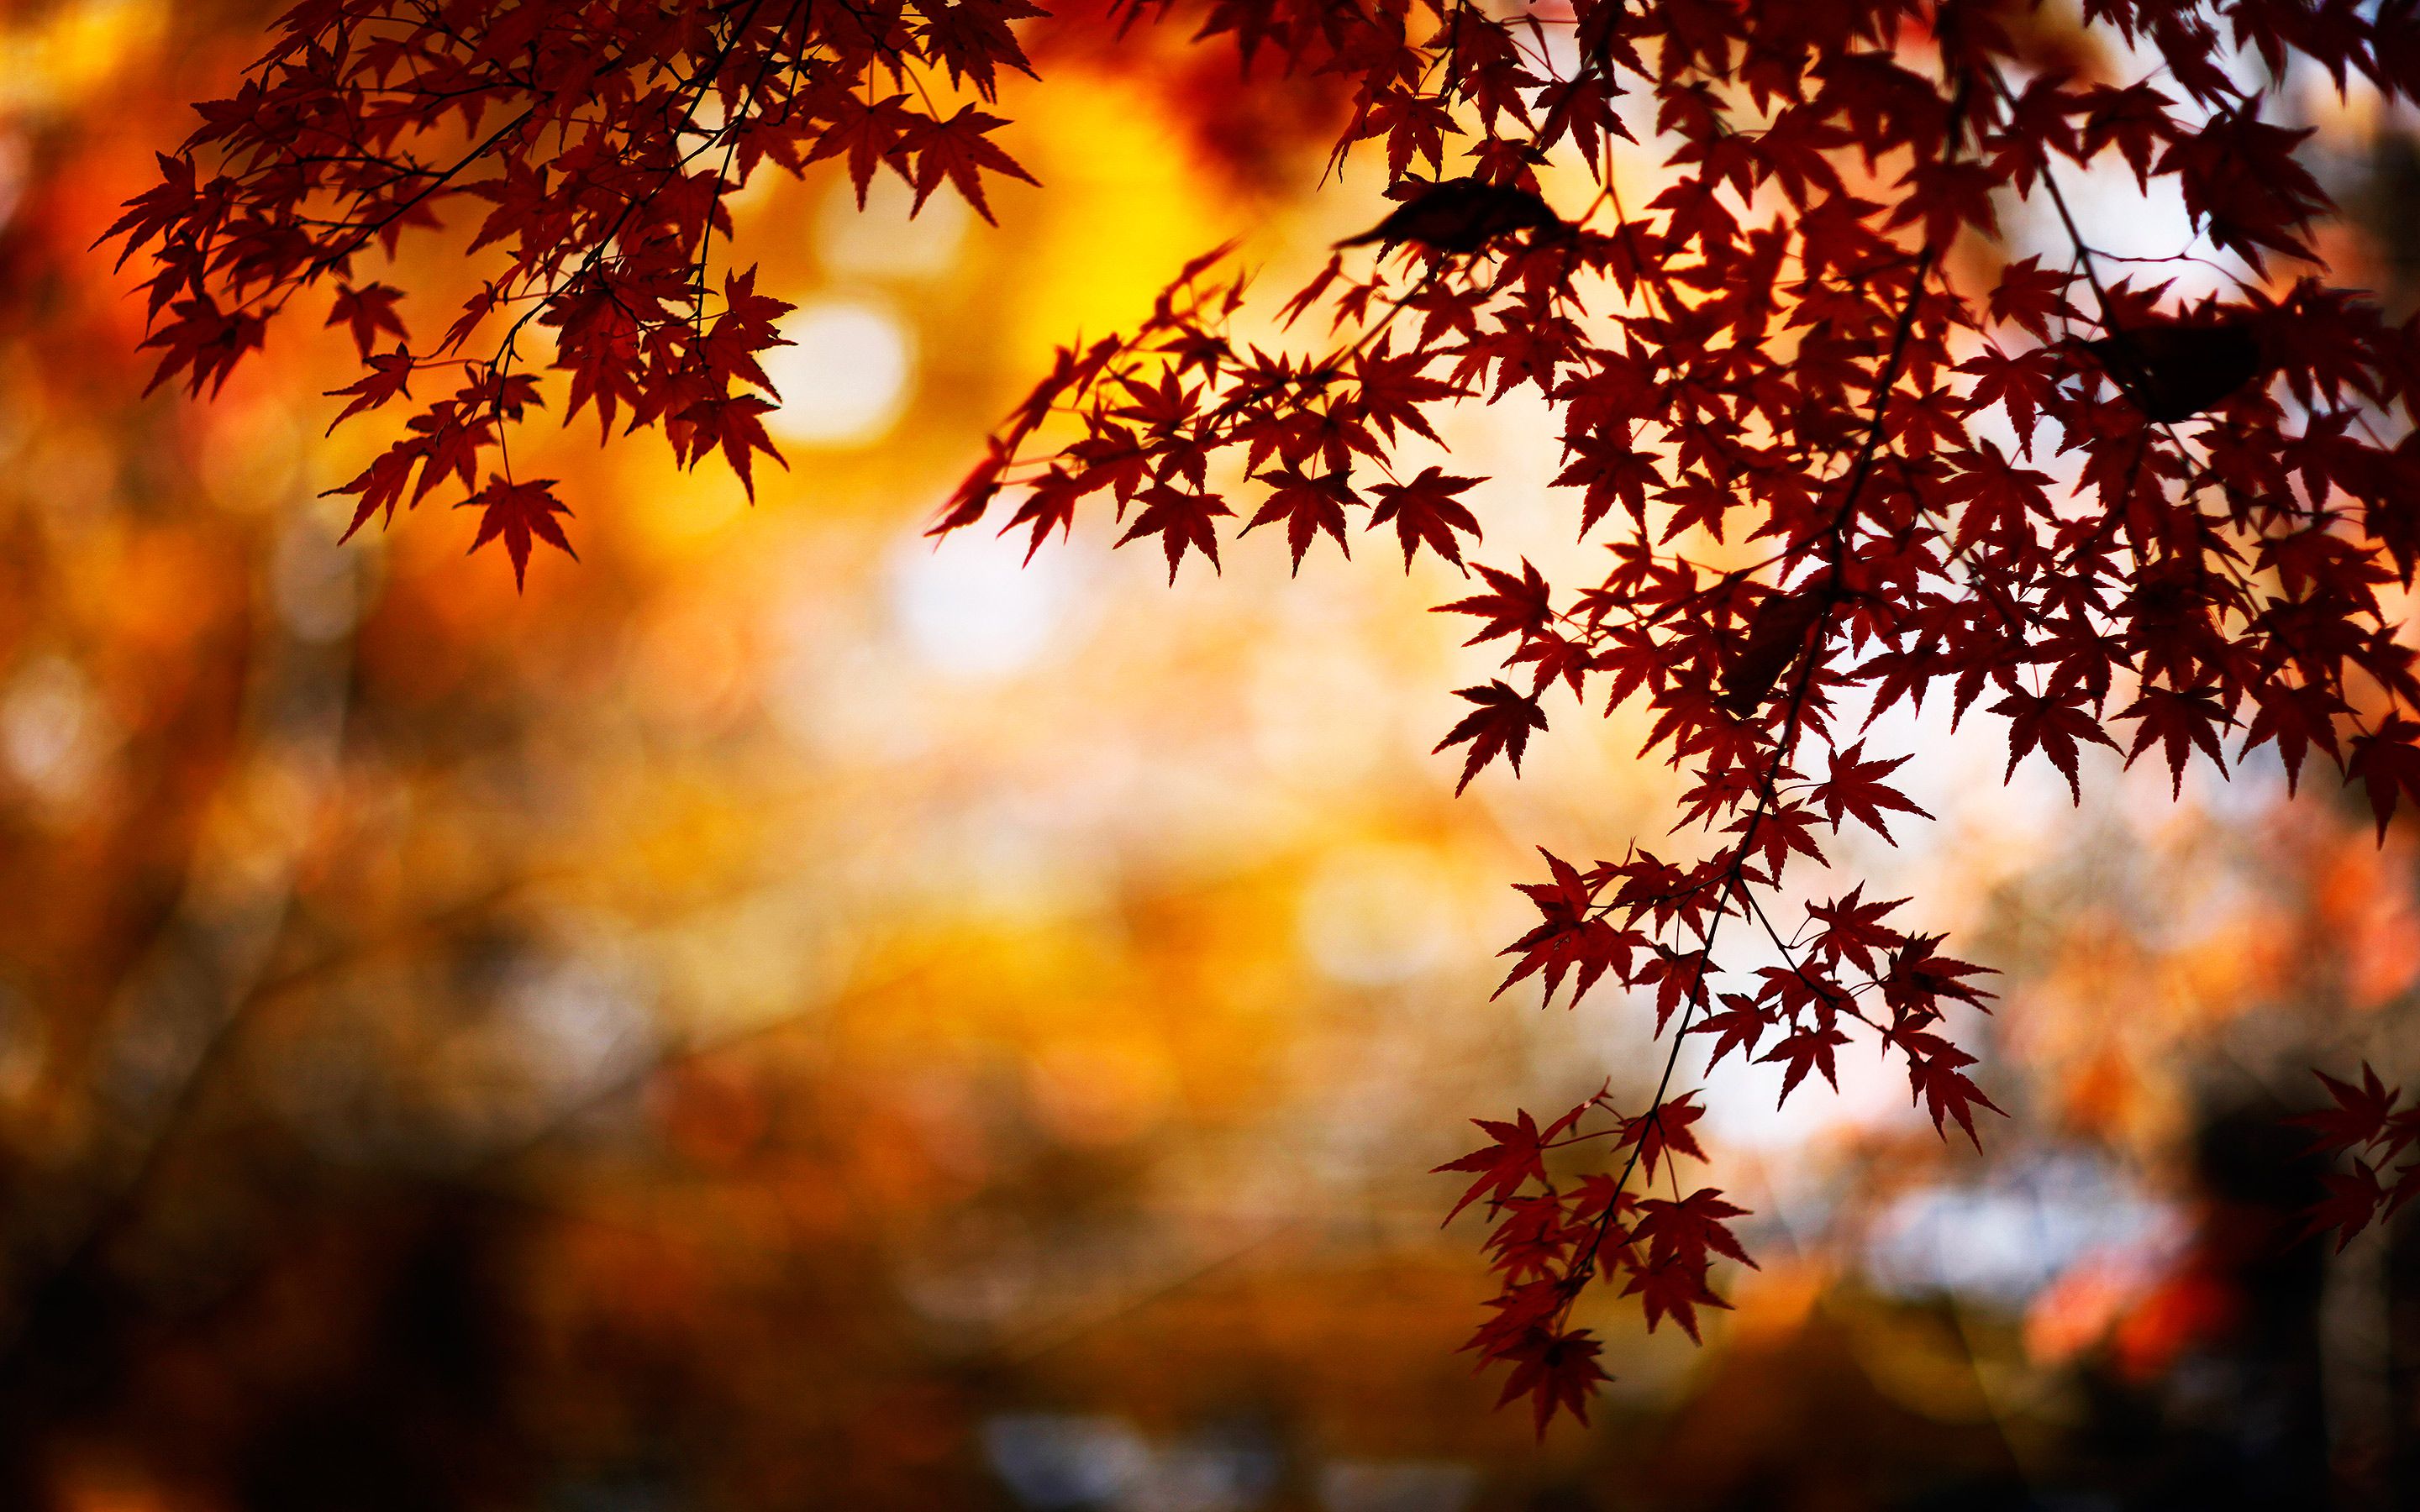 Autumn Sunset Leaves Wallpapers - Wallpaper Cave